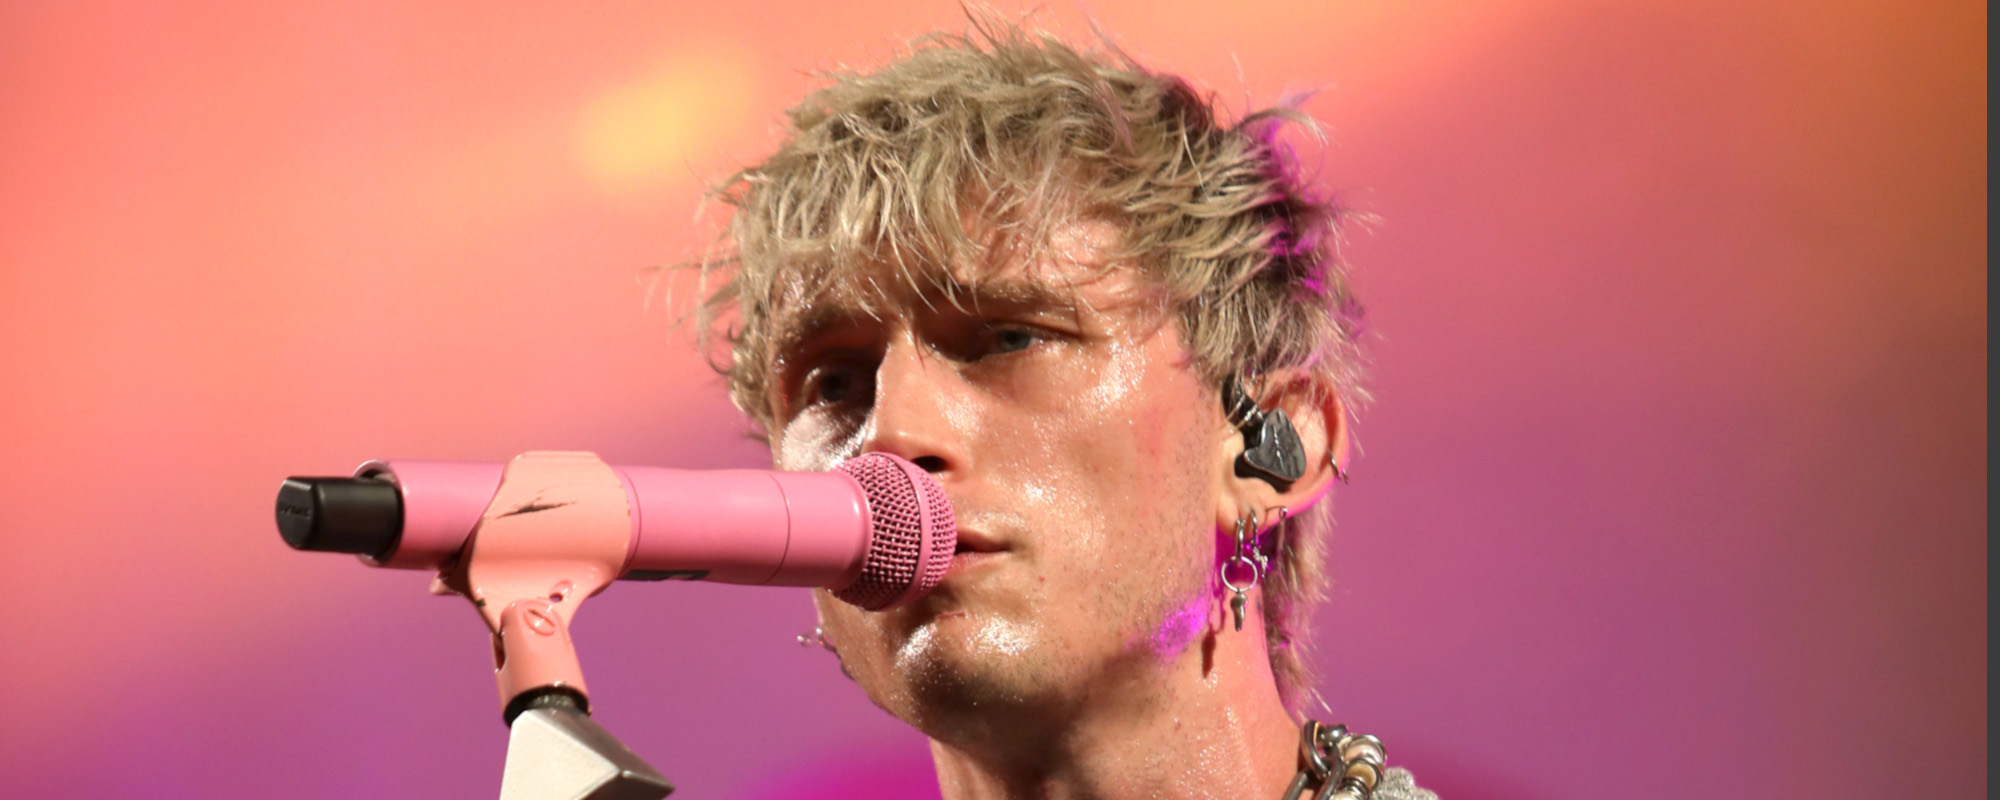 Machine Gun Kelly Releases New Single “Emo Girl” Featuring Willow Smith